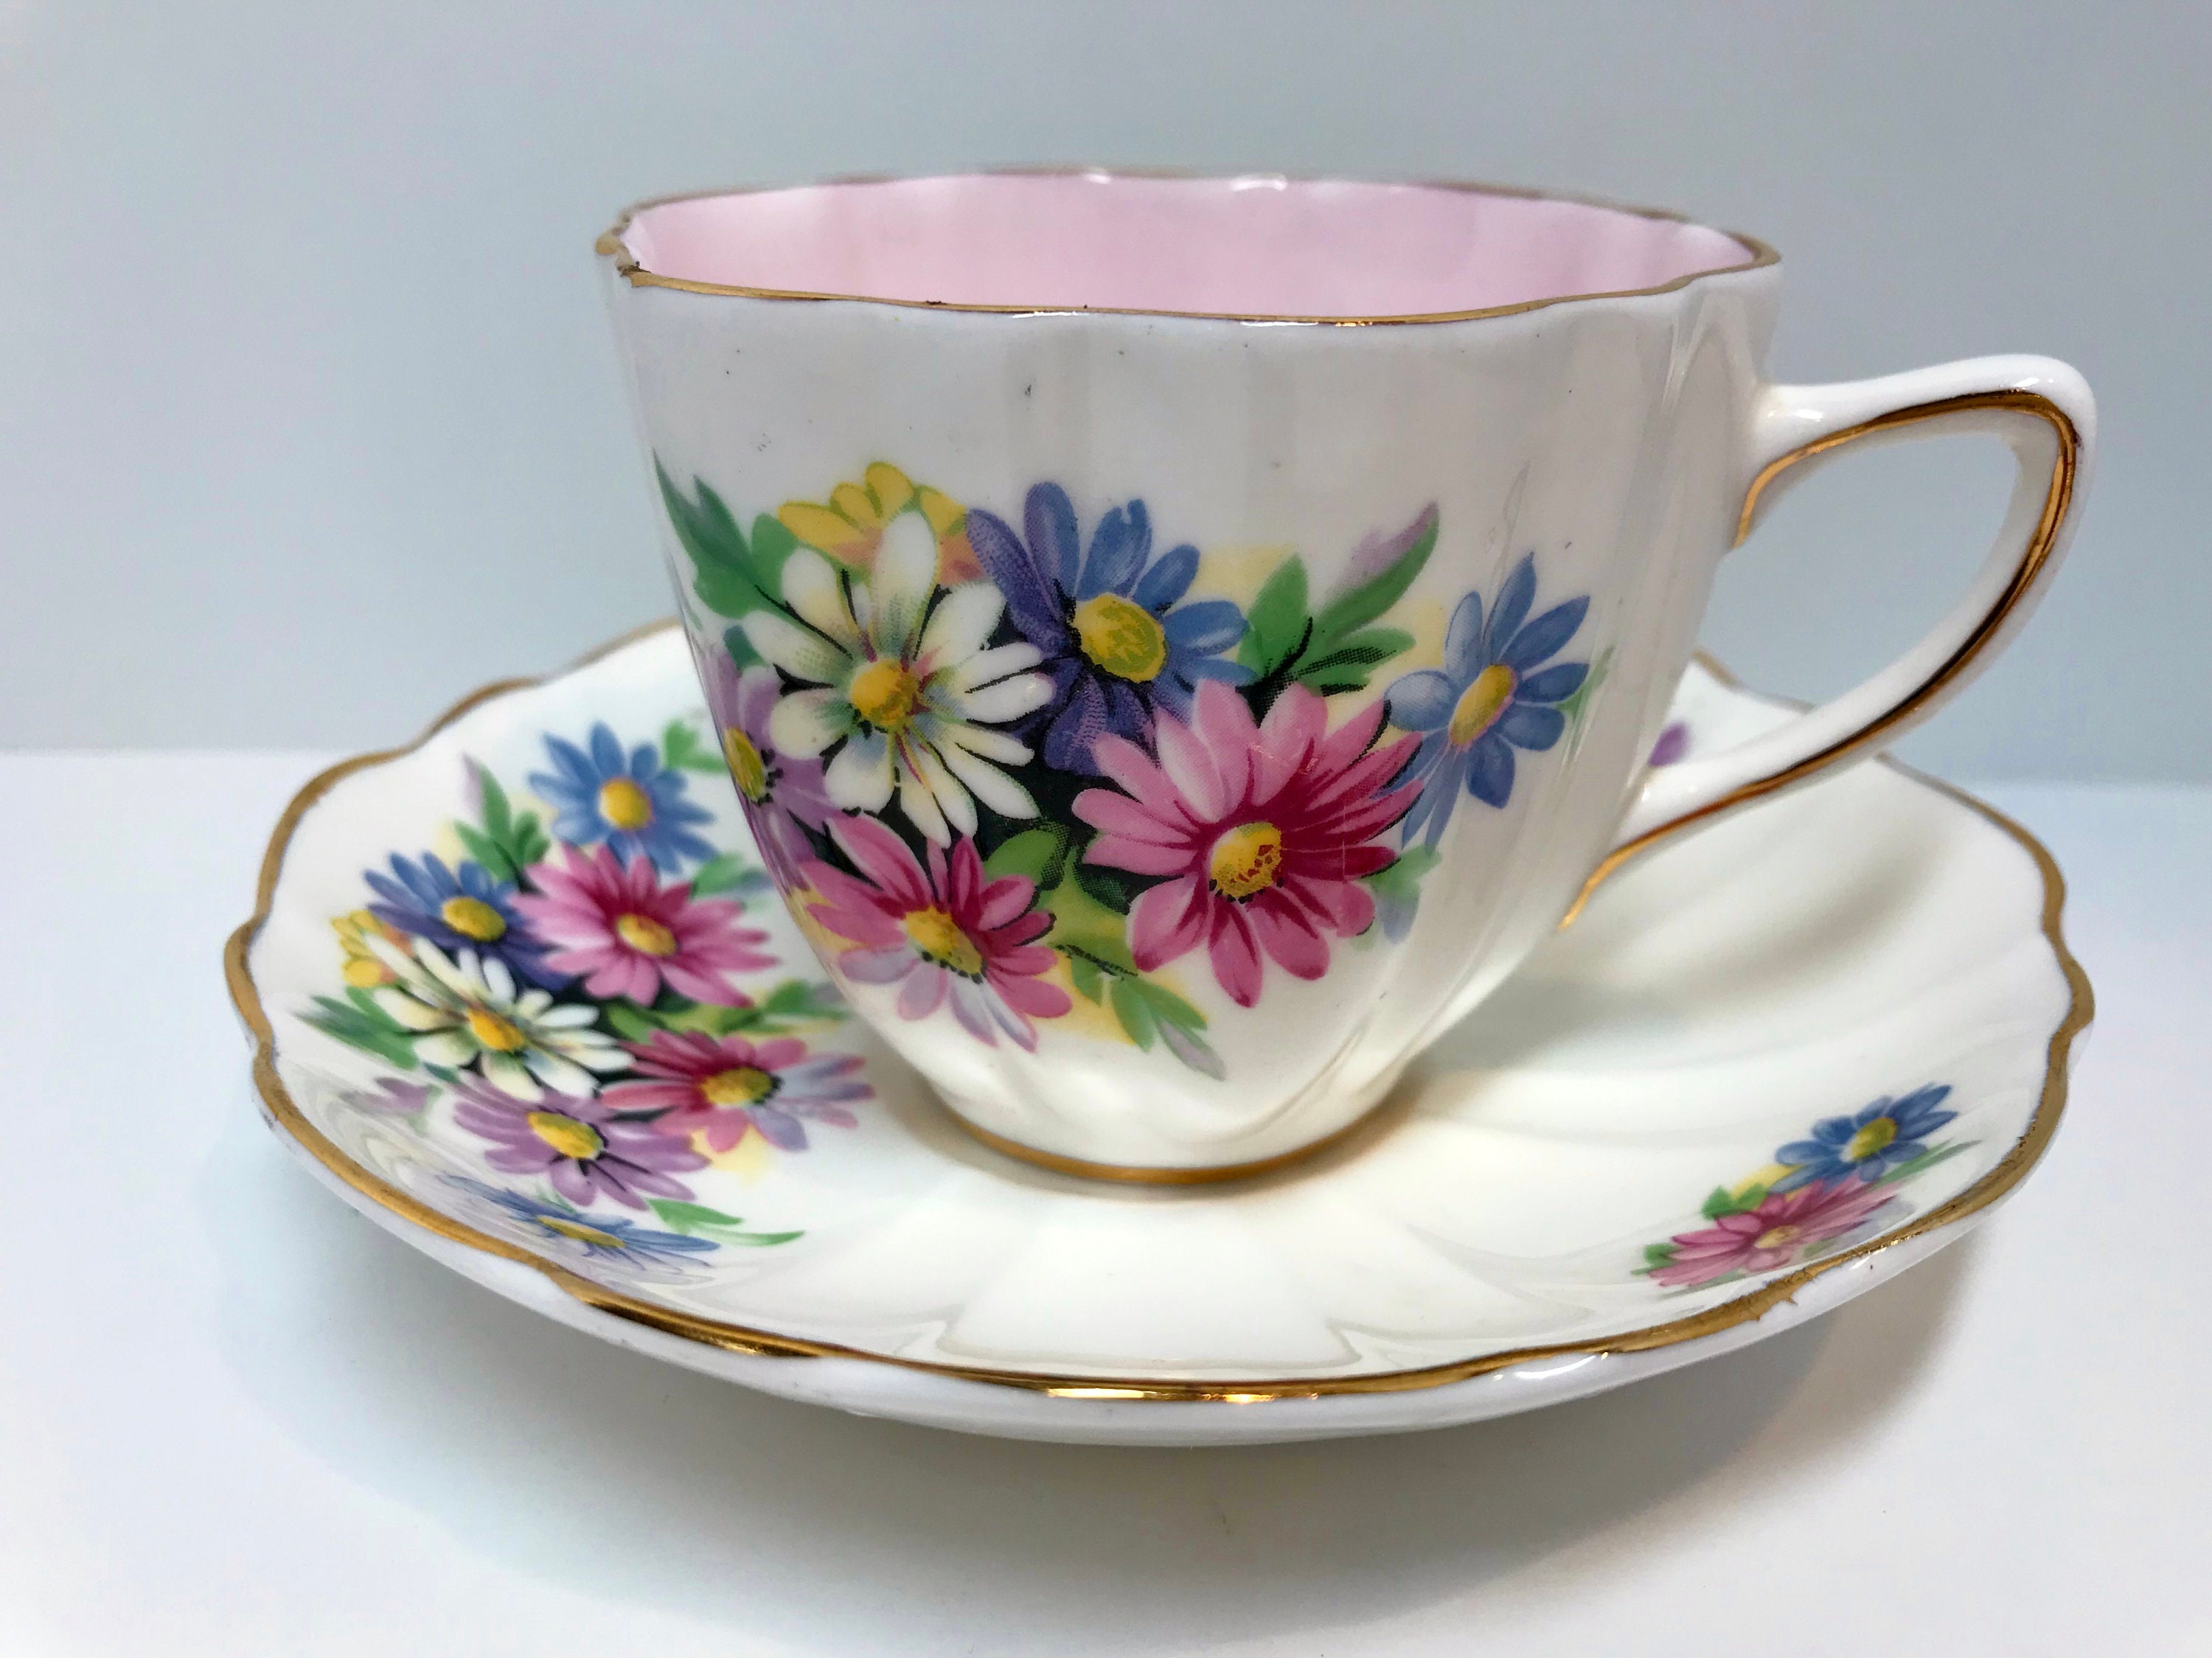 Pink Daisies by Old Royal Tea Cup and Saucer, English Bone China Cups